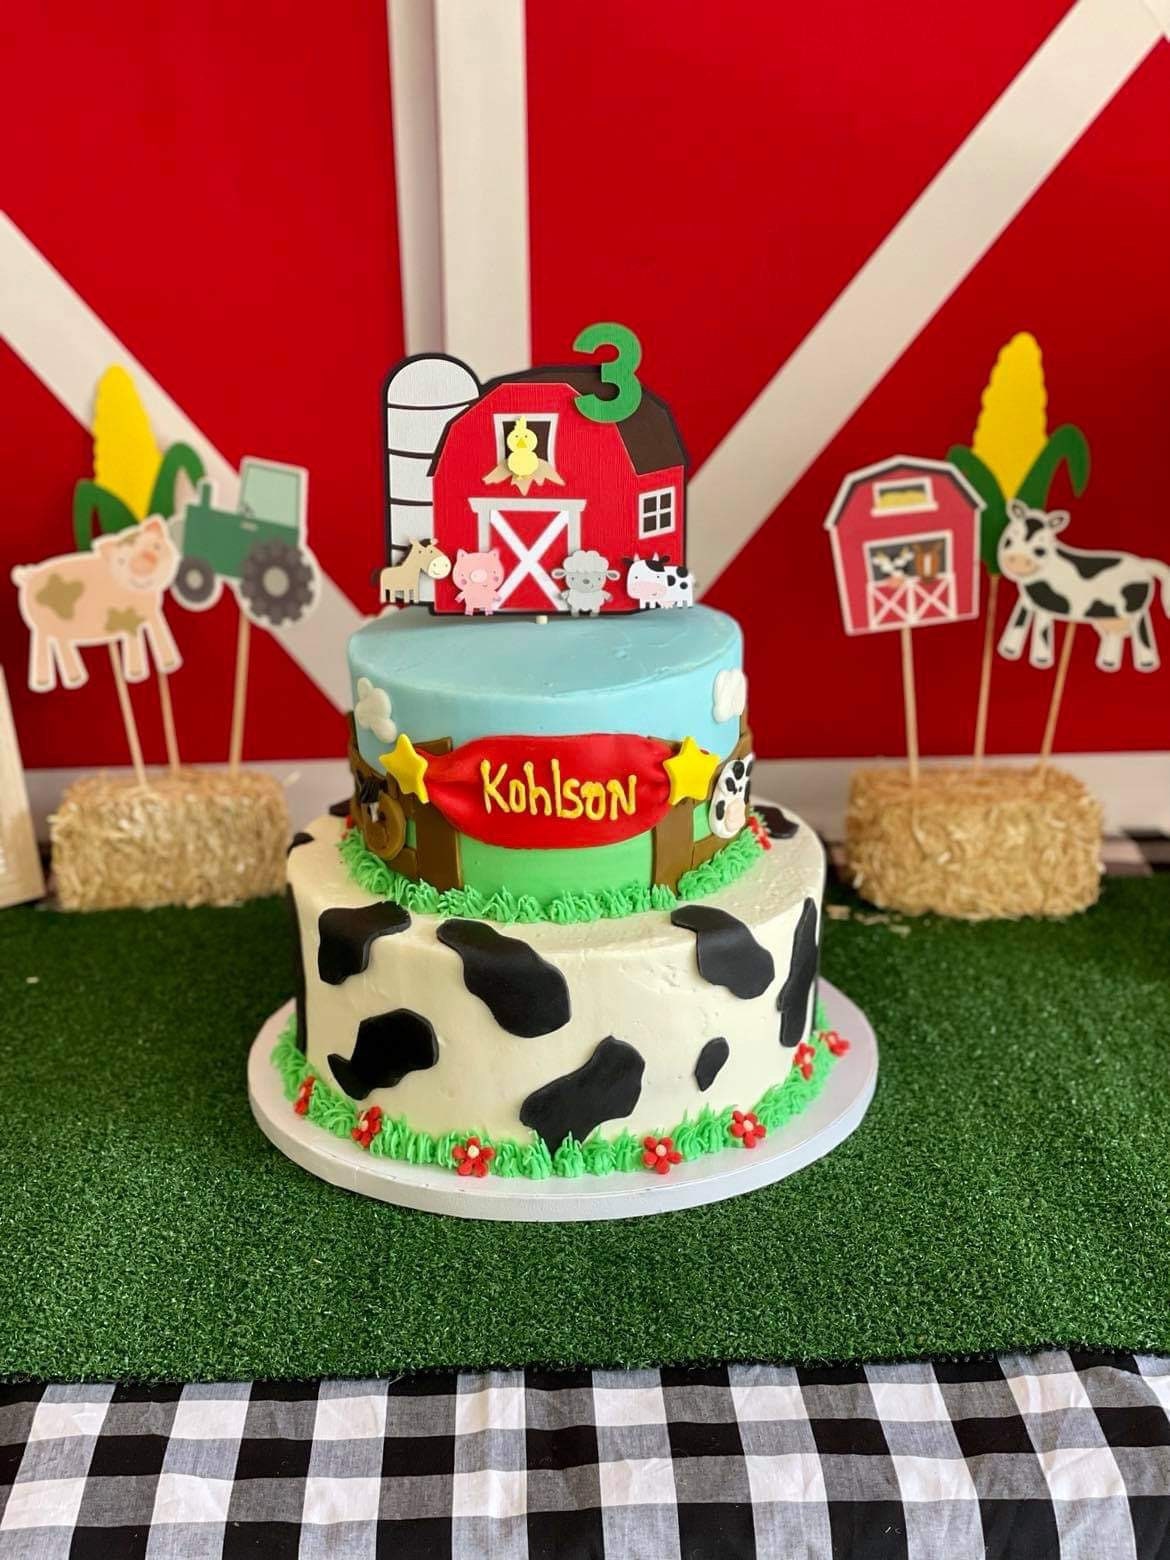 Cow Two Birthday Cake Topper Happy Birthday Cake Decorations for Cow Farm  Zoo Animal Themed Second Year Old 2nd Birthday Party Supplies Double Sided